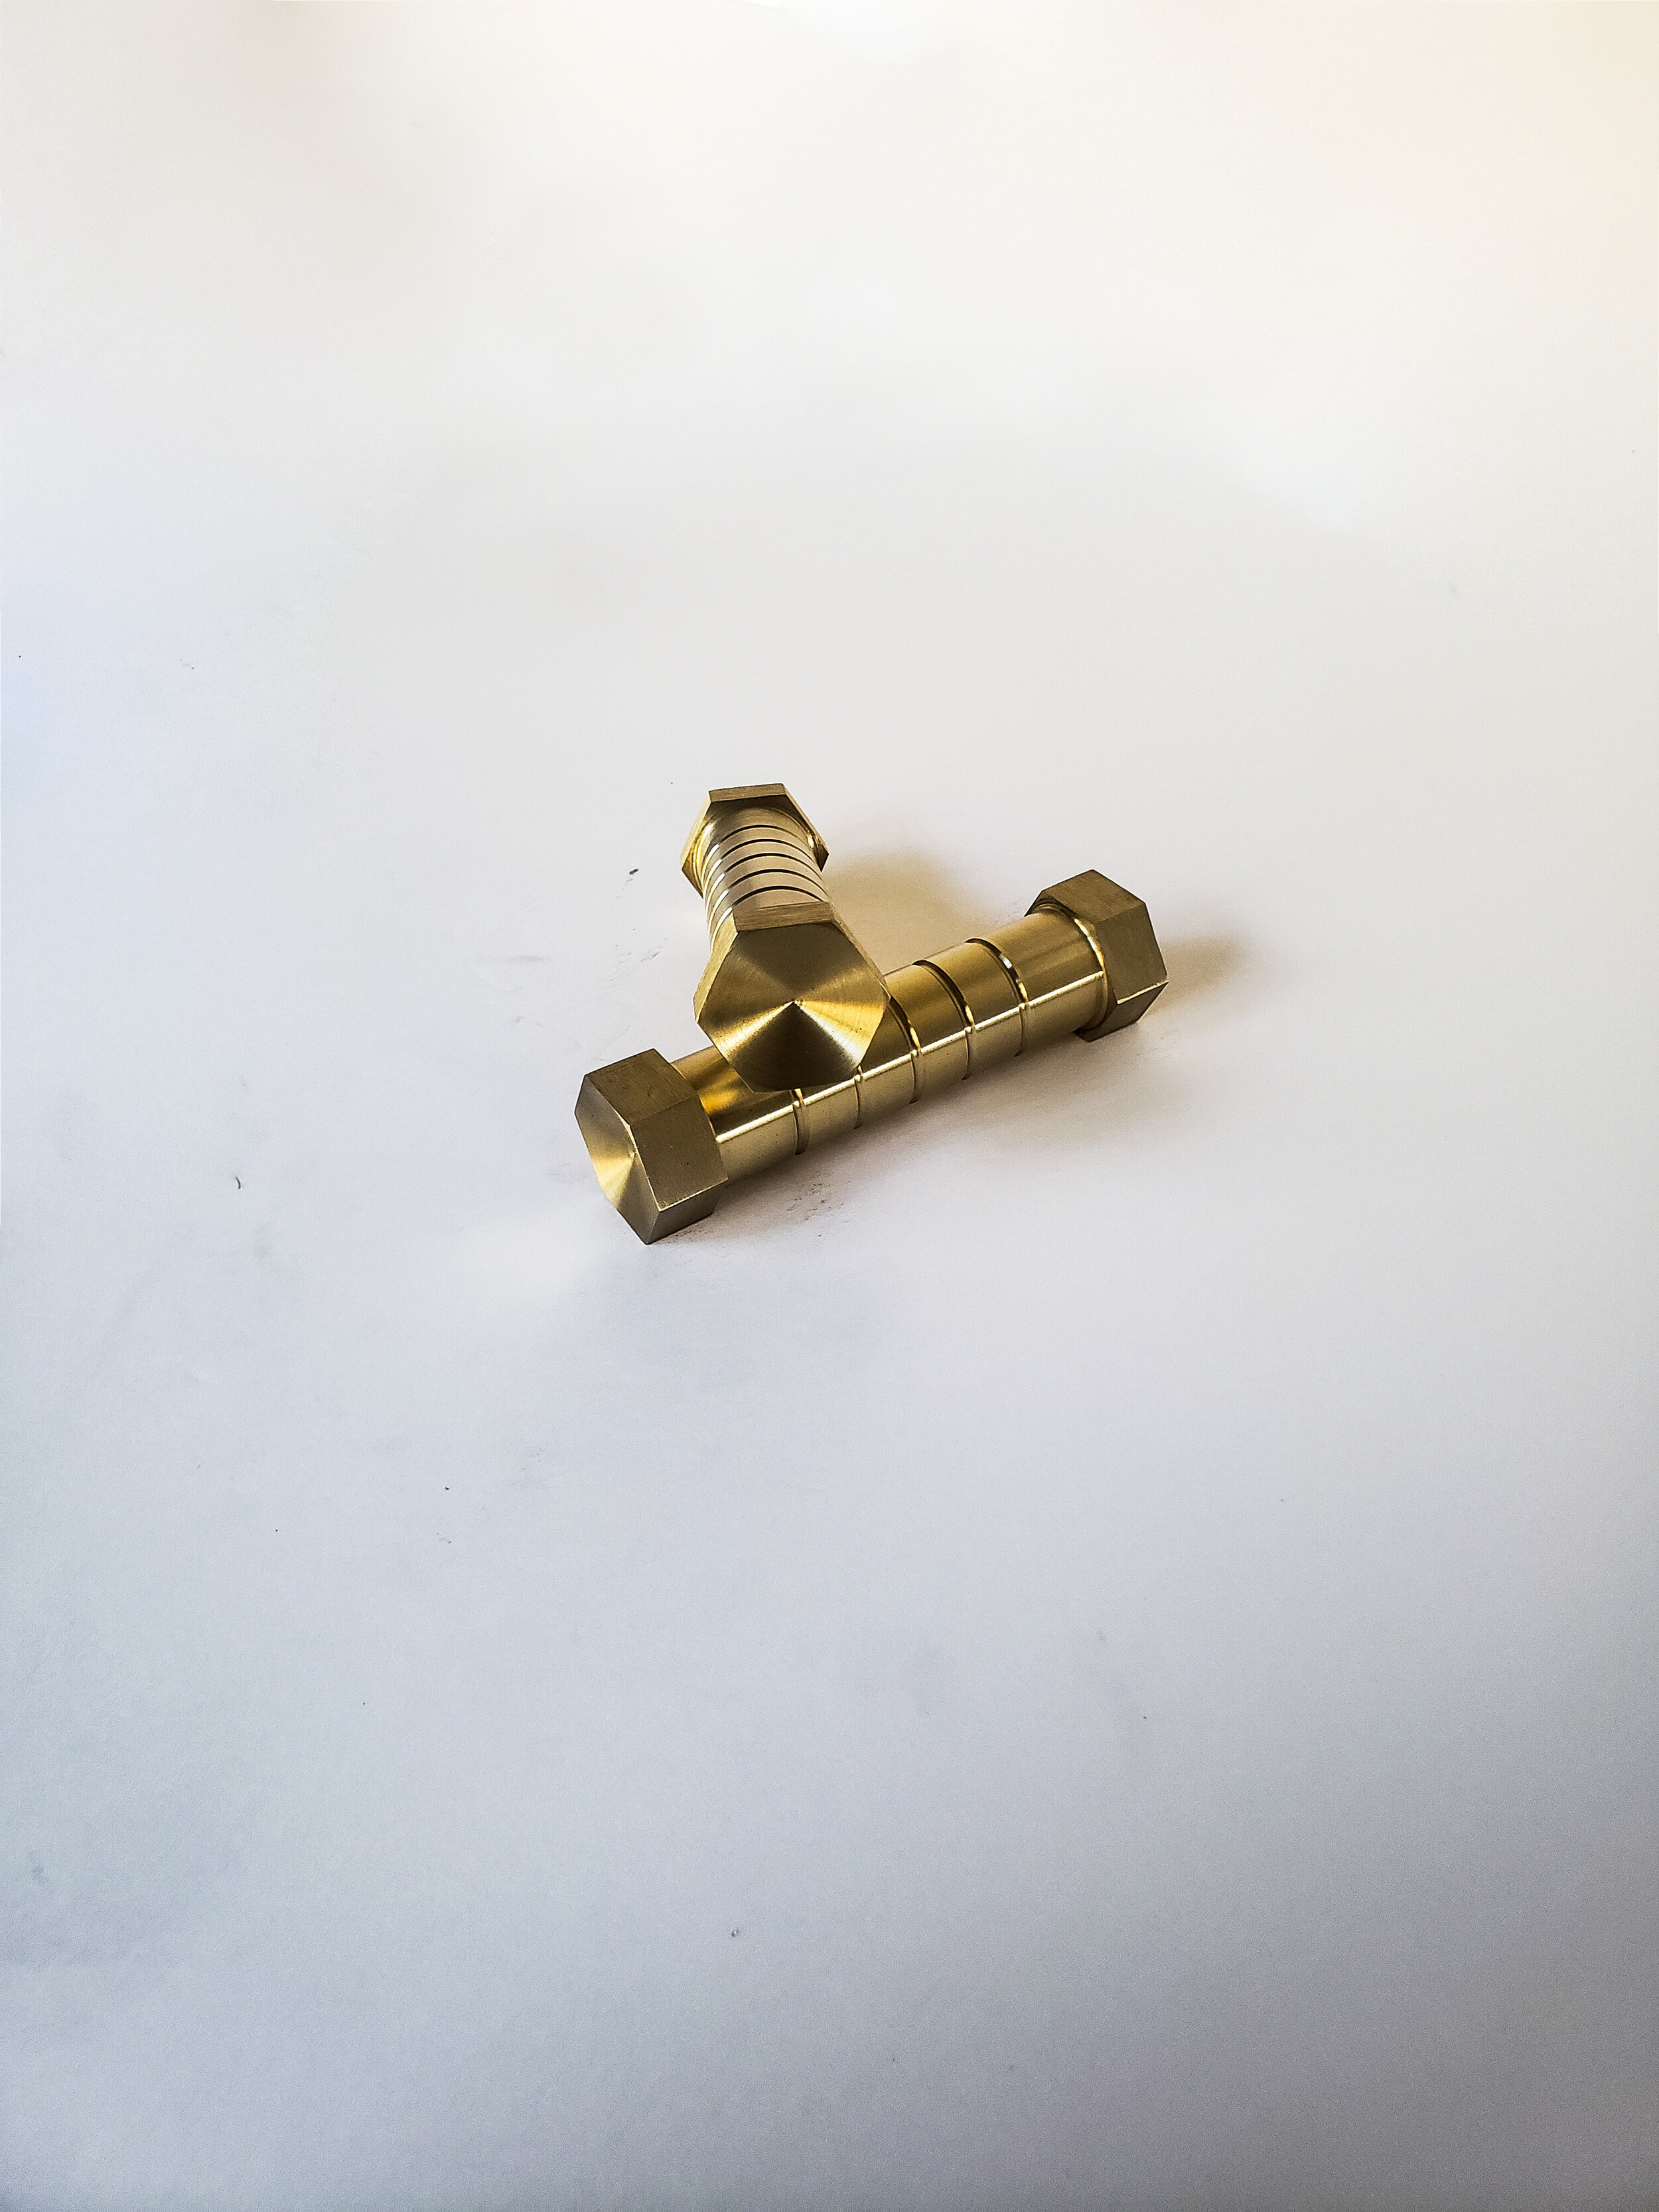 Brass Hexing Unknurled Solid mount2.jpg